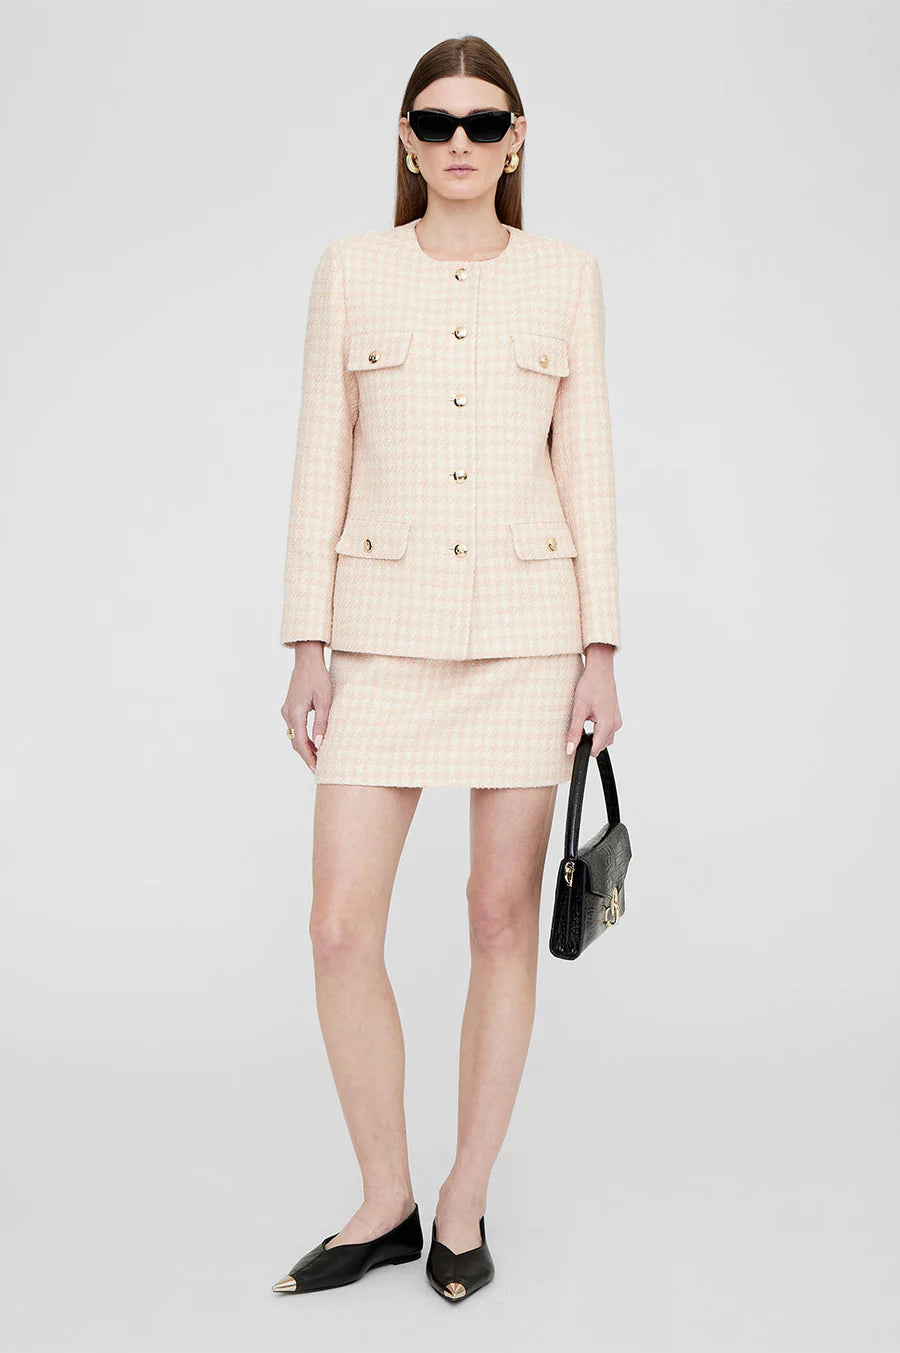 Janet Jacket - Cream And Peach Houndstooth